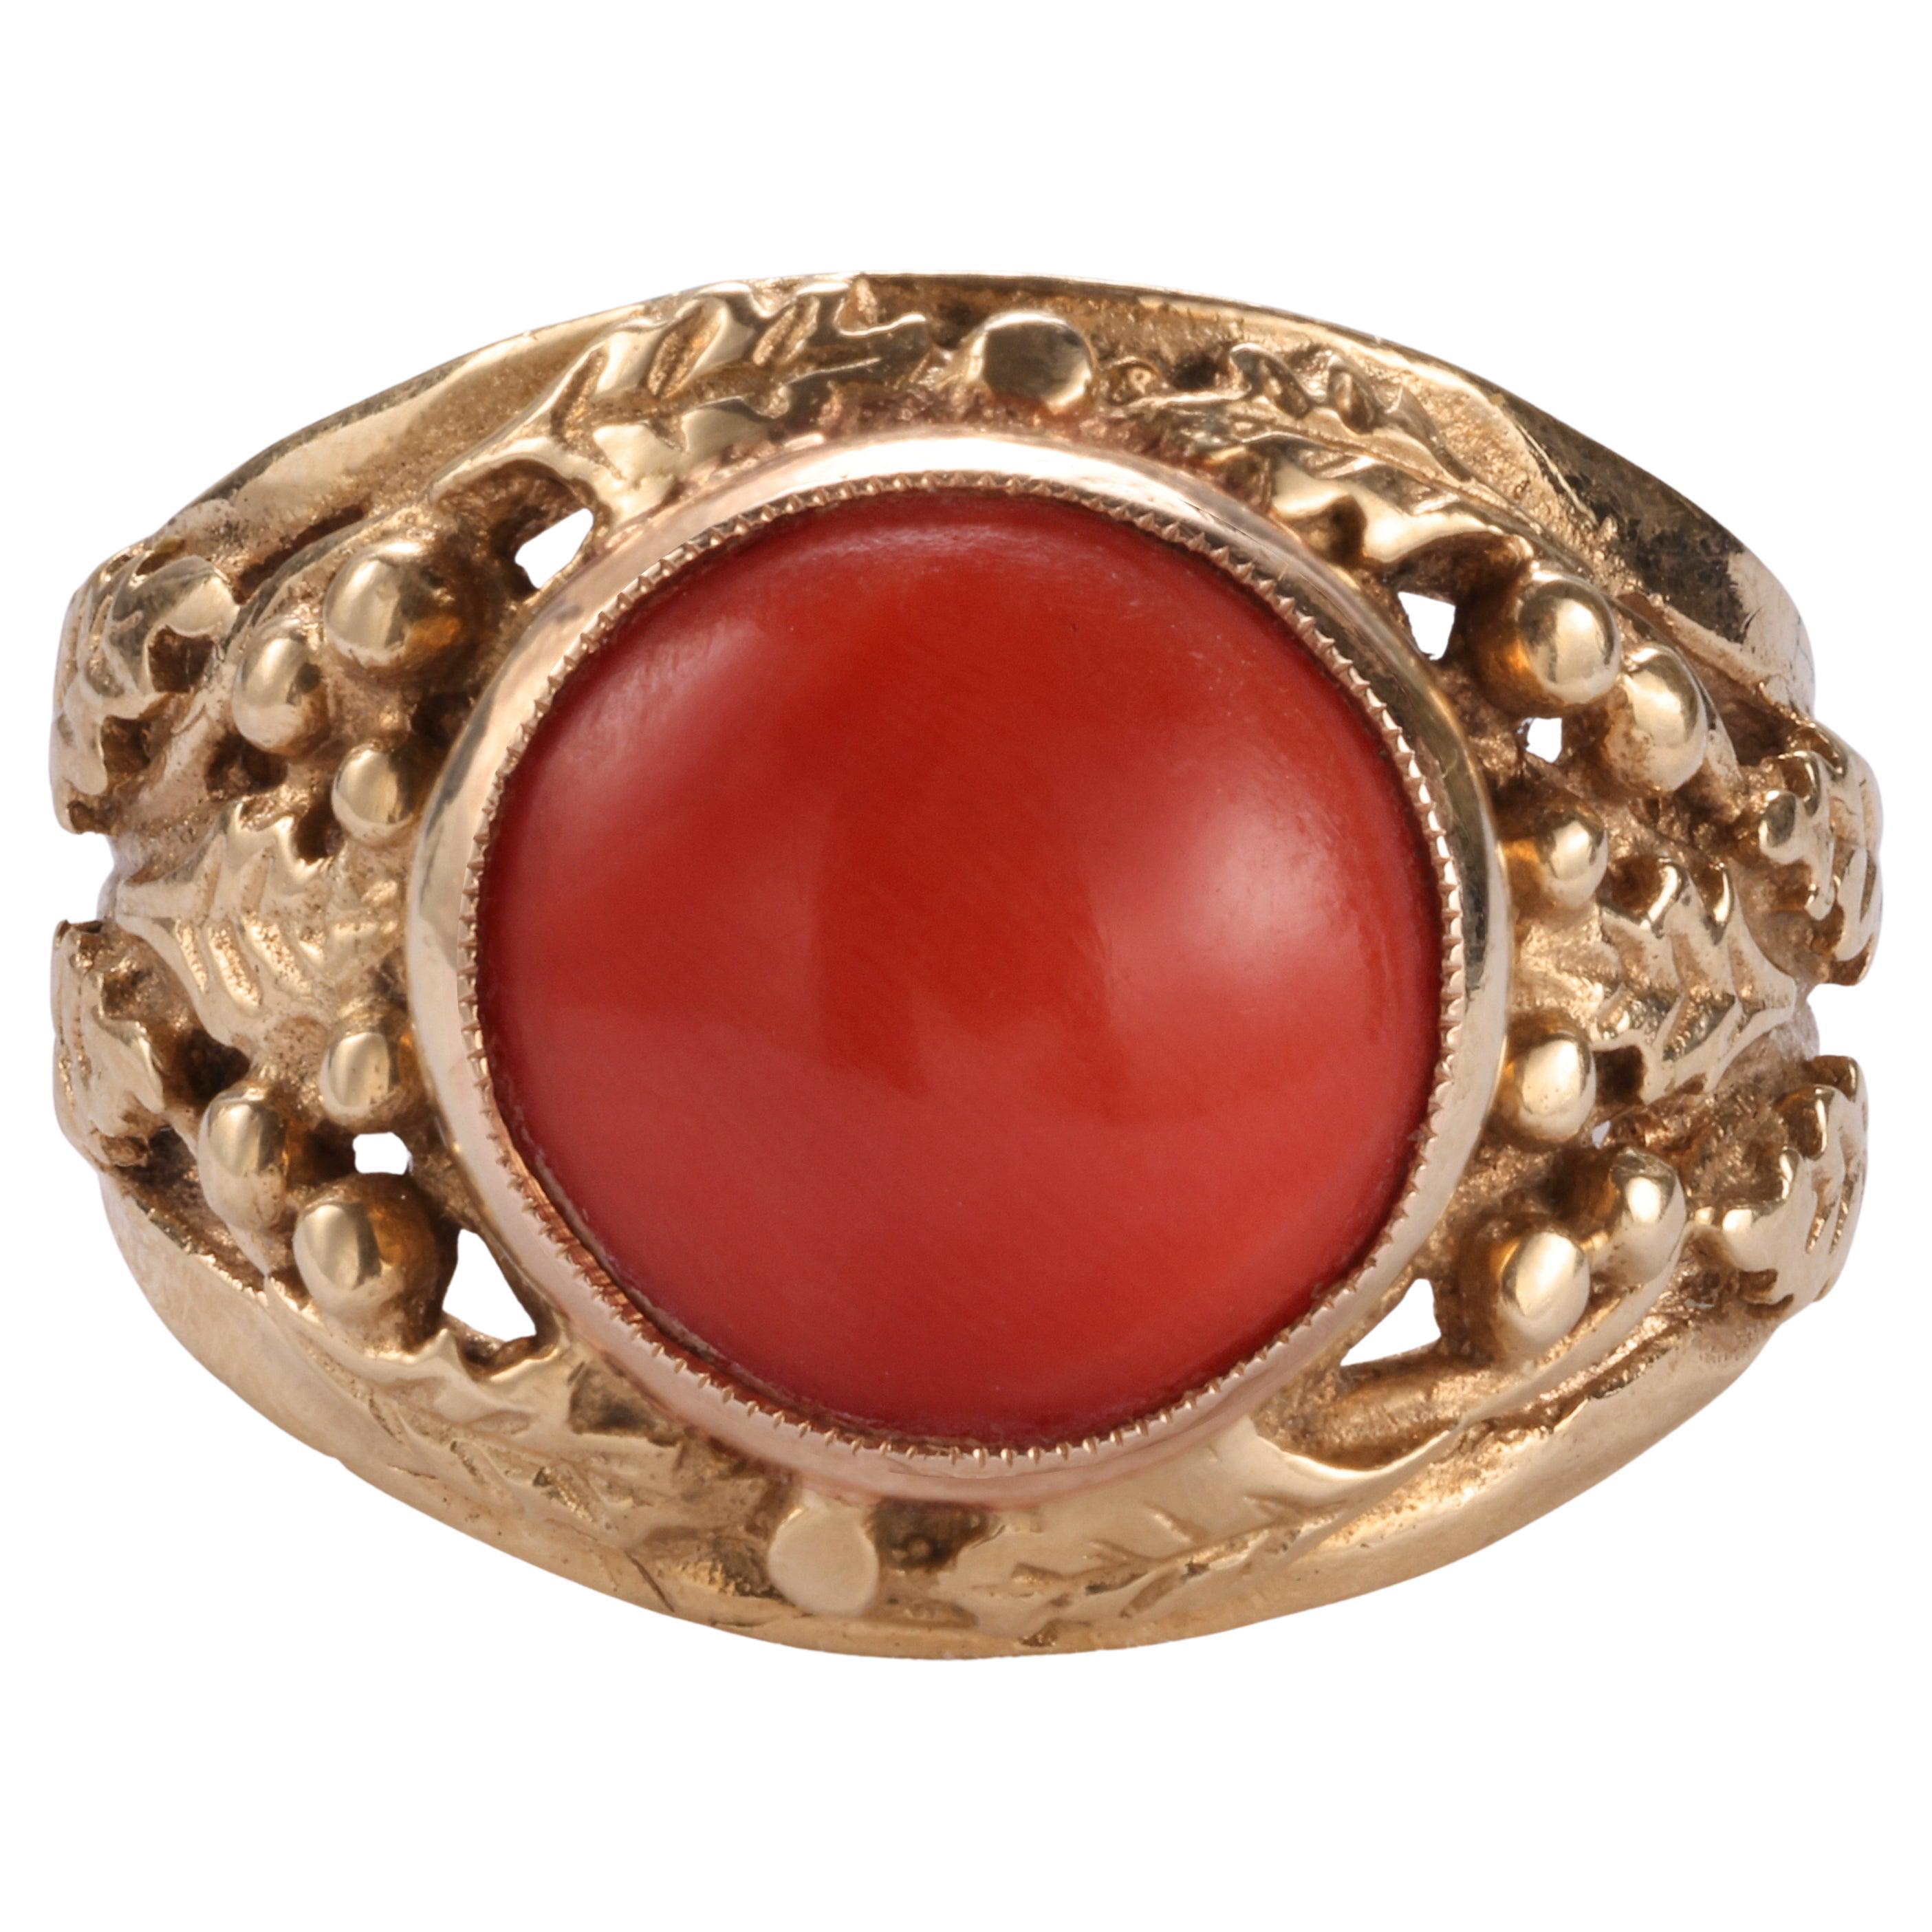 Natural Mens Red Coral Ring Sterling Silver 925 Marjan handmade Quality Ring  | eBay